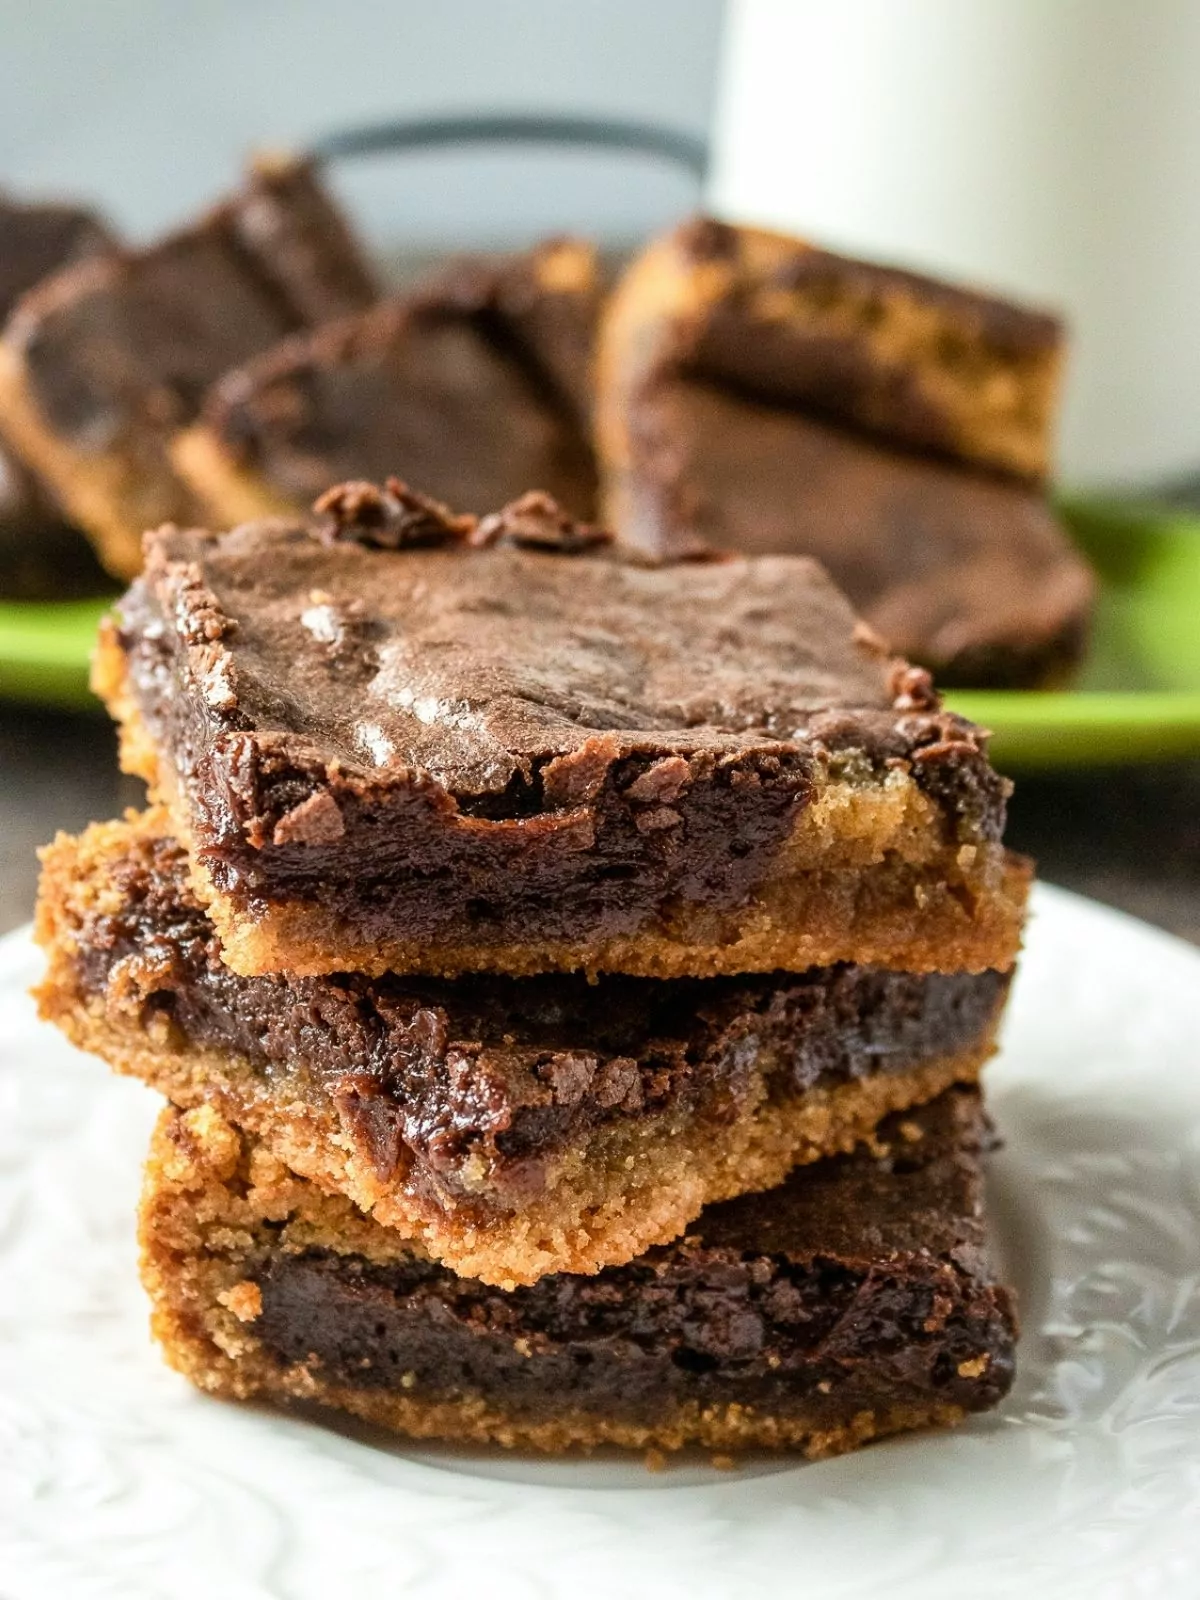 stacked peanut butter brownies on plate.